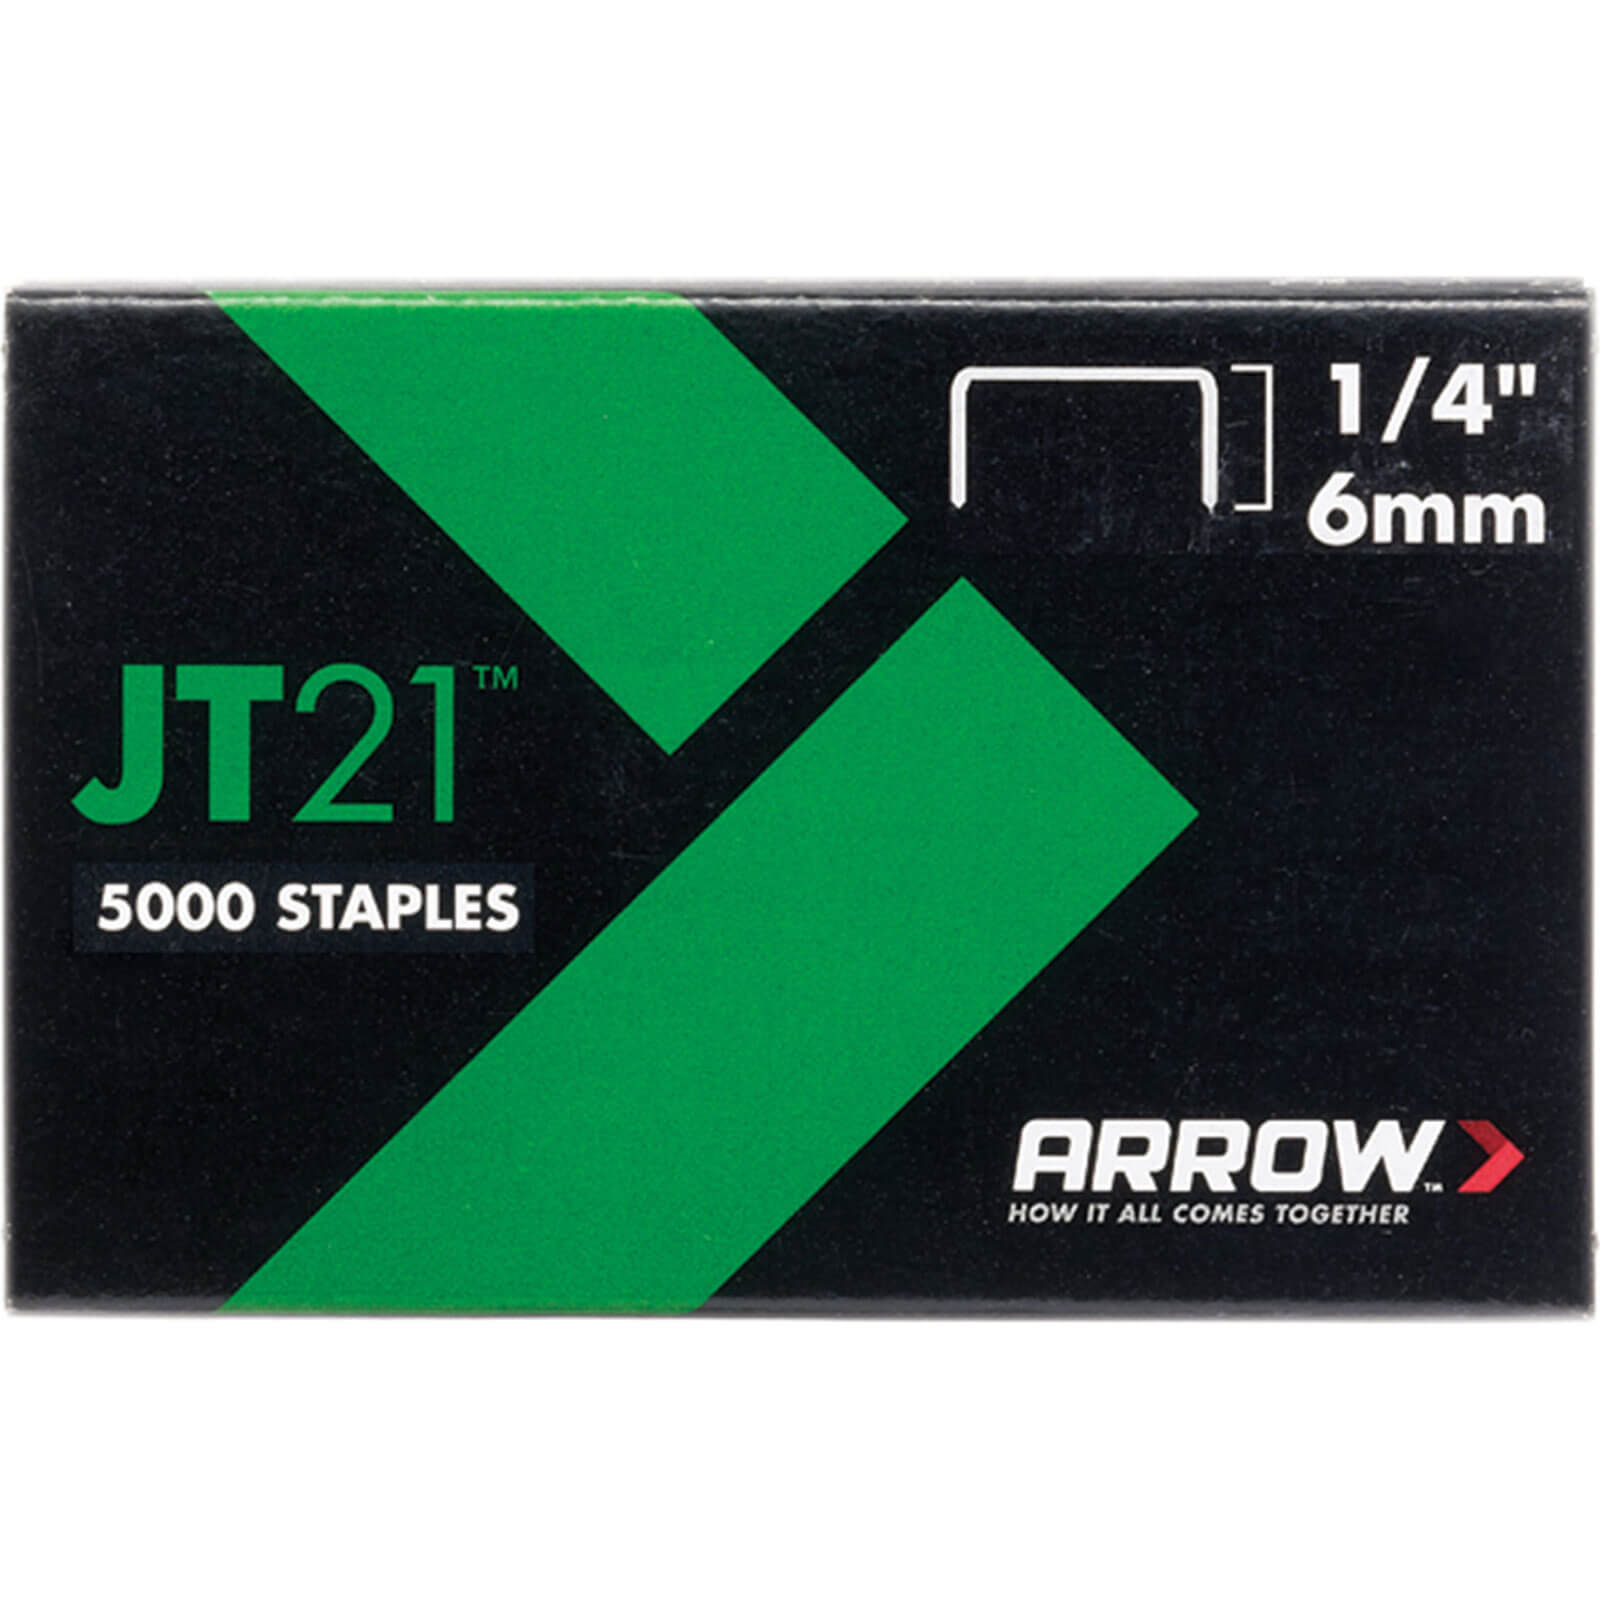 Arrow 214 Staples 6mm / 1/4" Pack of 1000 to fit JT21 & 21C